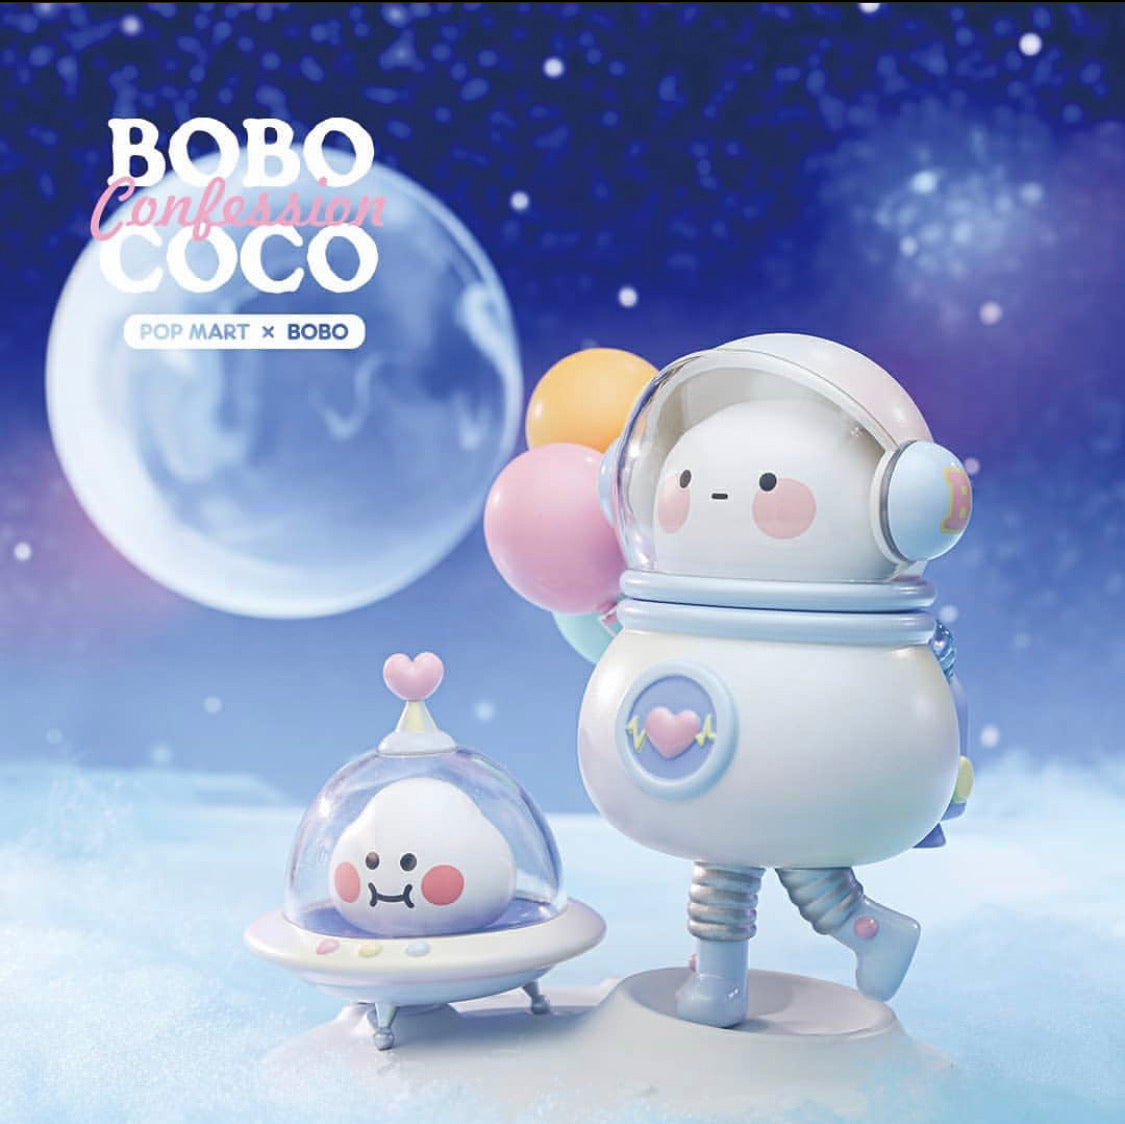 Toy robot, spaceship, dome, and more in BOBO & COCO Confession in Universe vinyl figure image.